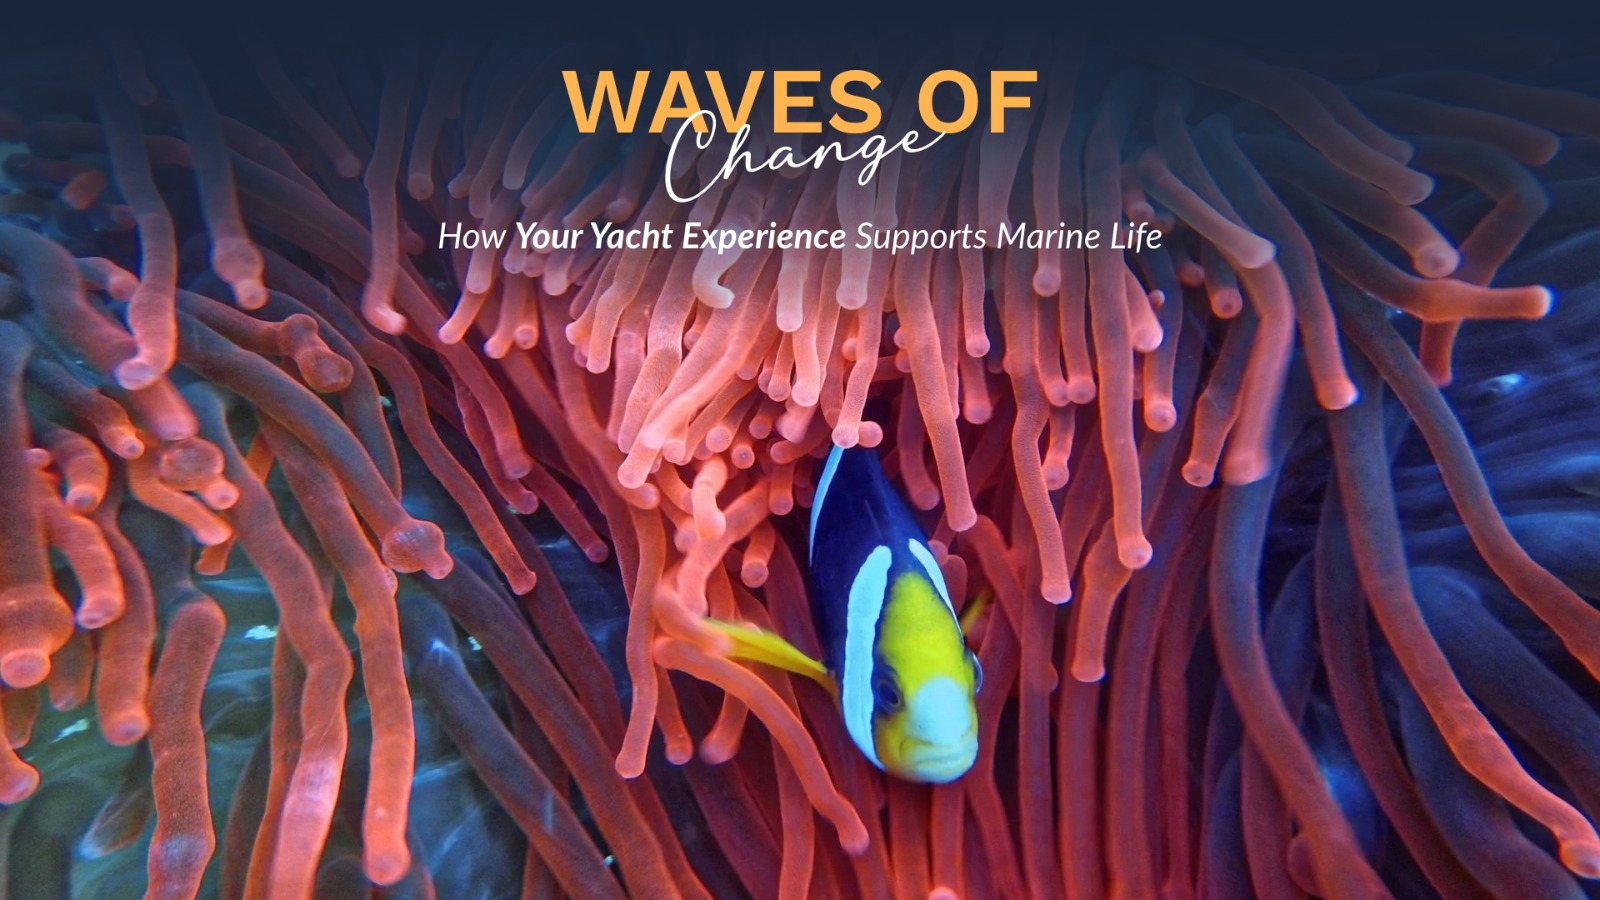 Prime Luxury Rentals - How Your Yacht Experience Supports Marine Life